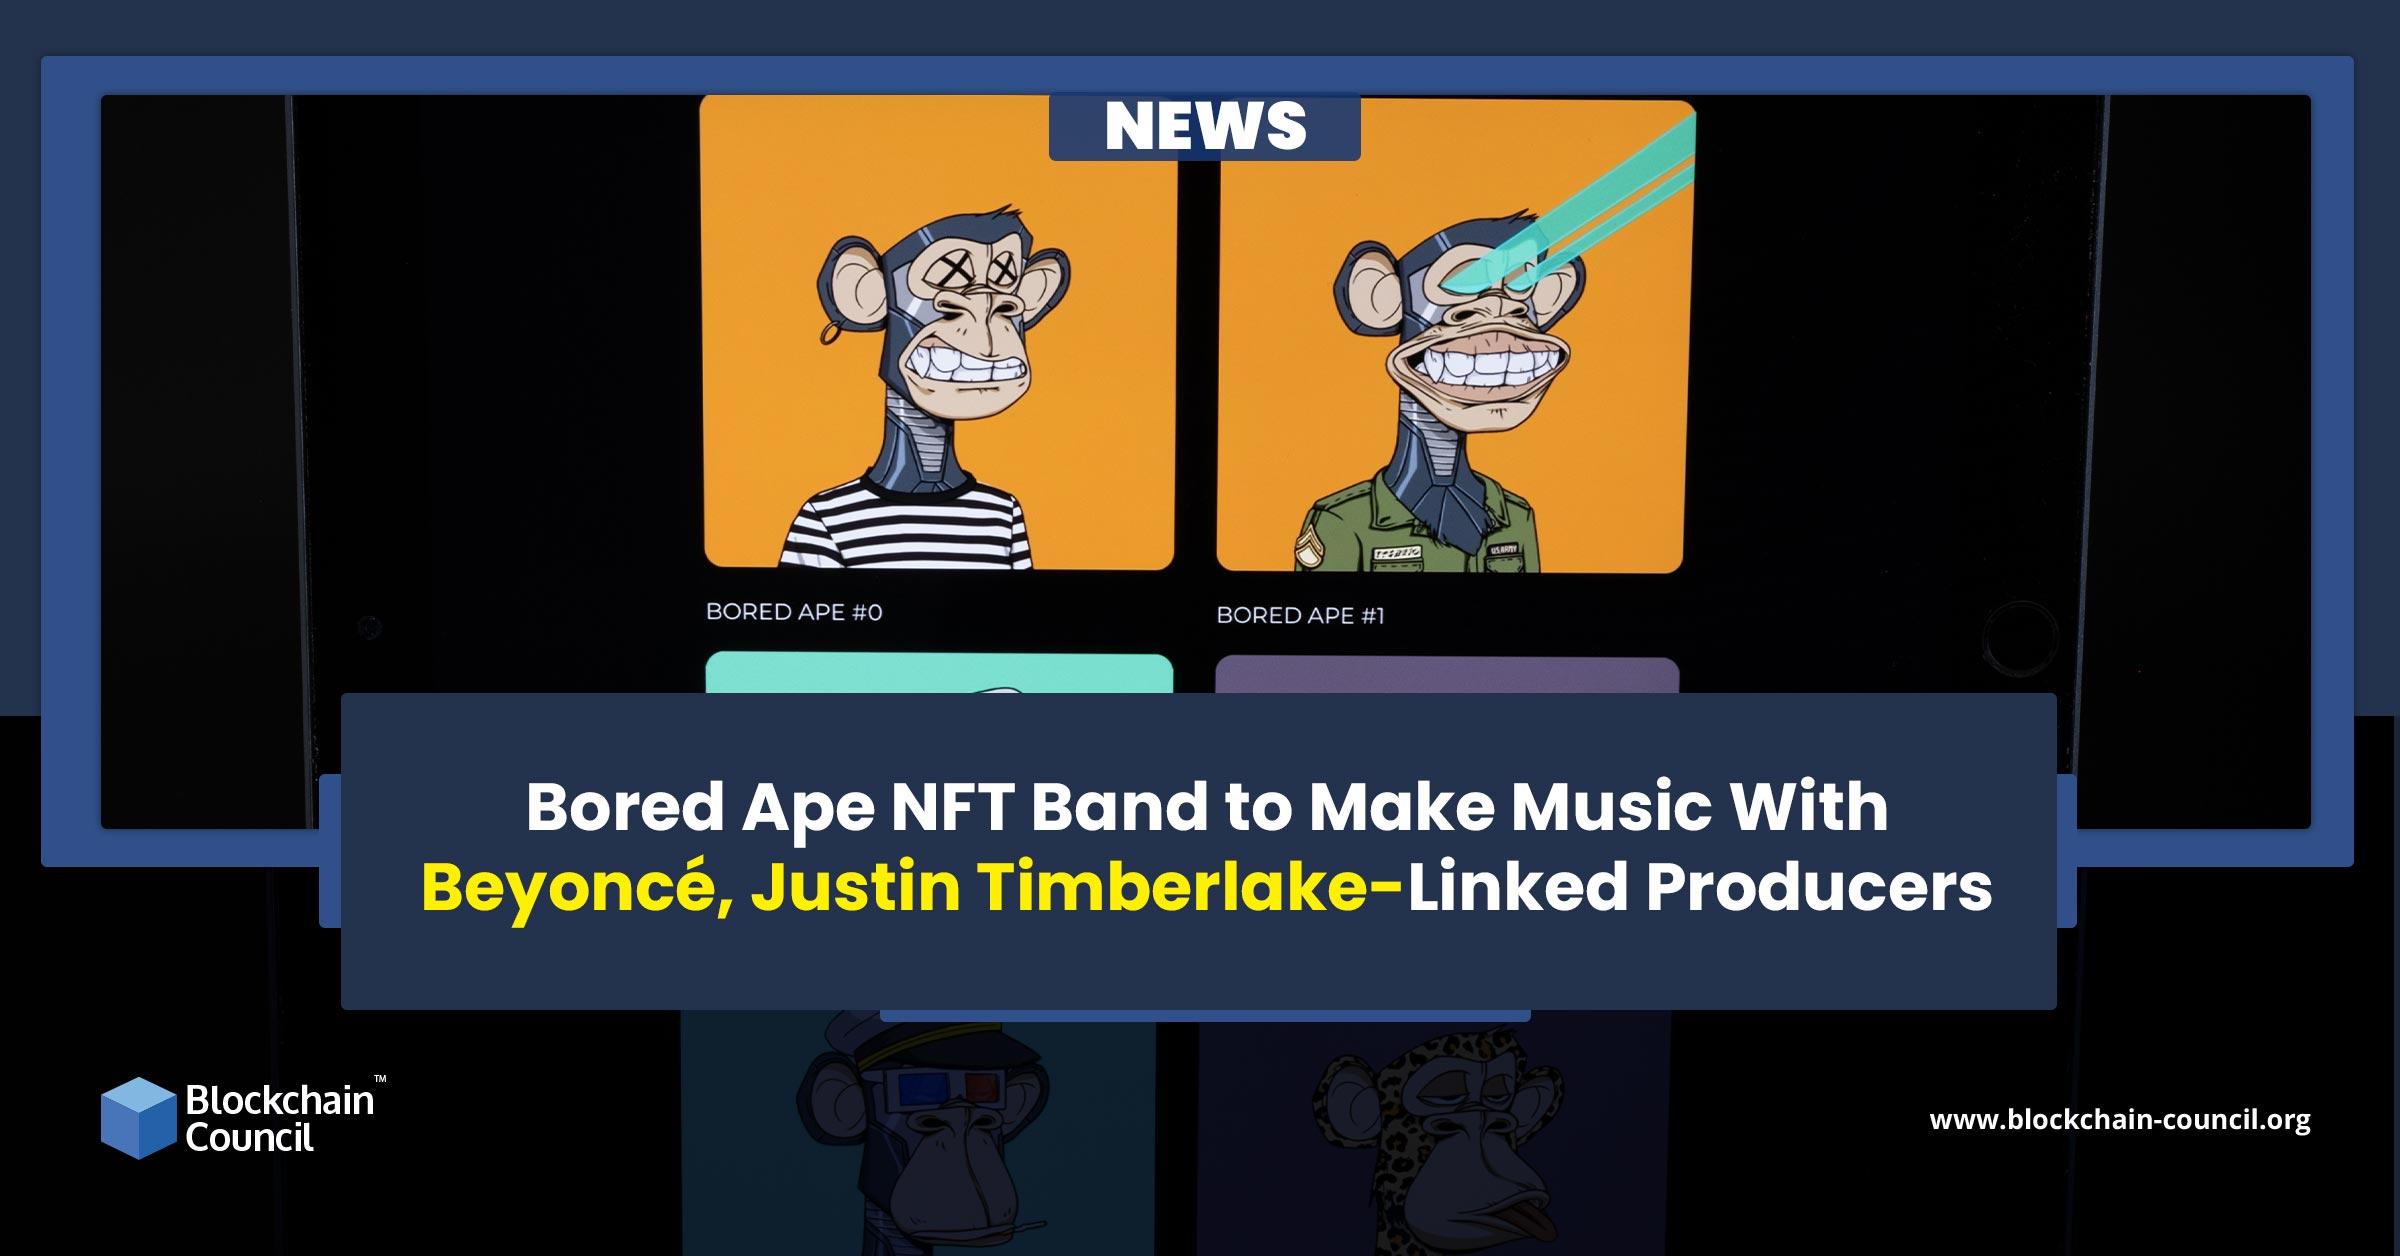 Bored Ape NFT Band to Make Music With Beyoncé, Justin Timberlake-Linked Producers